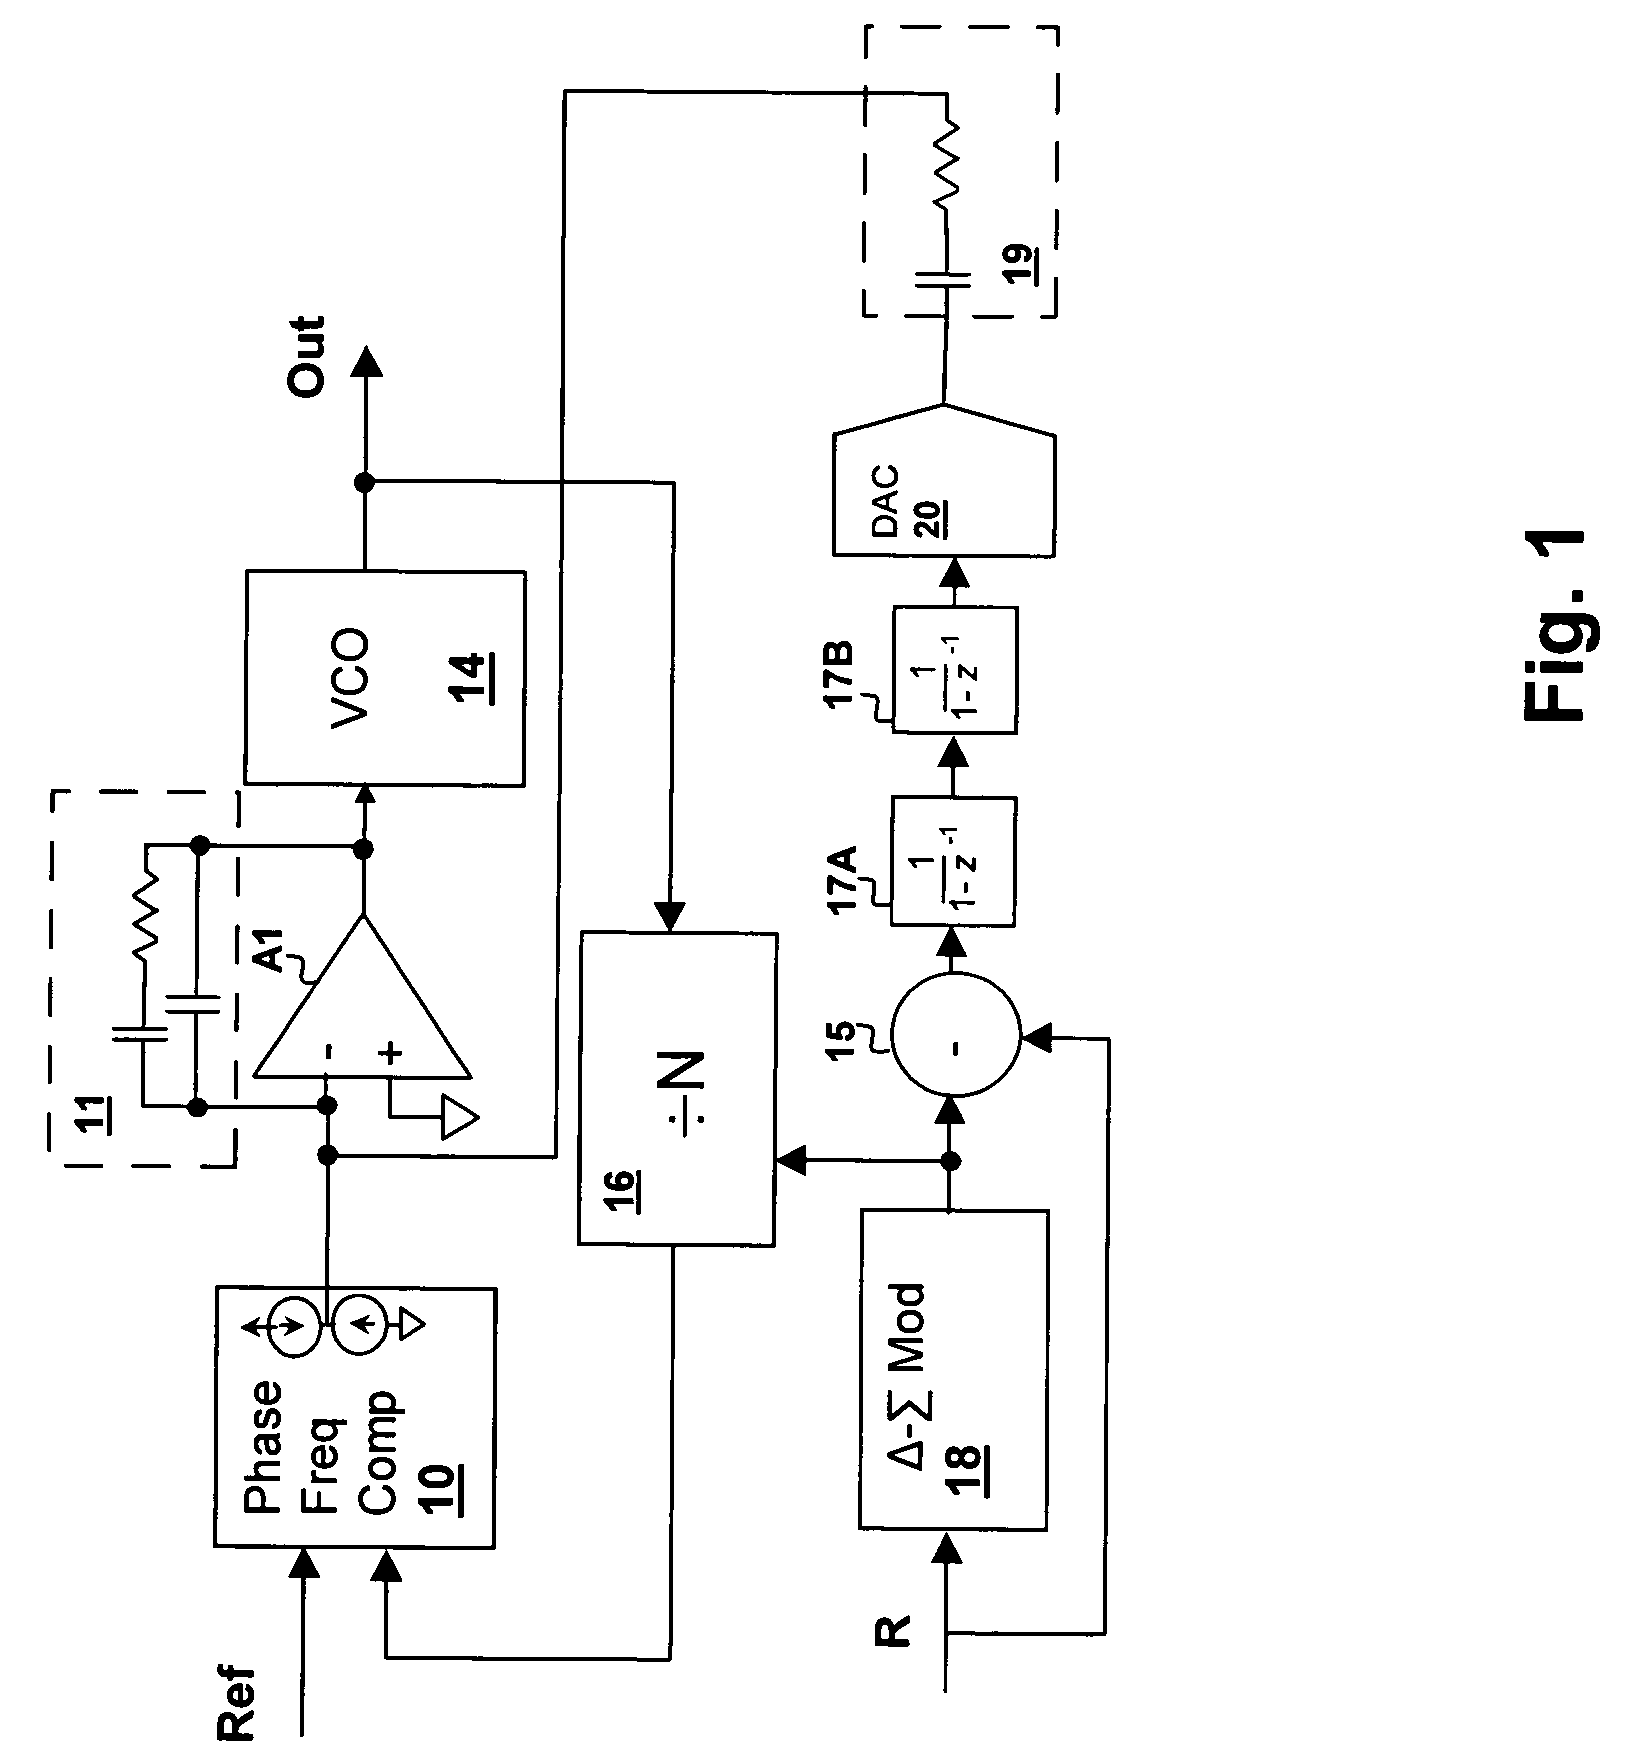 Method and apparatus for canceling jitter in a fractional-N phase-lock loop (PLL)